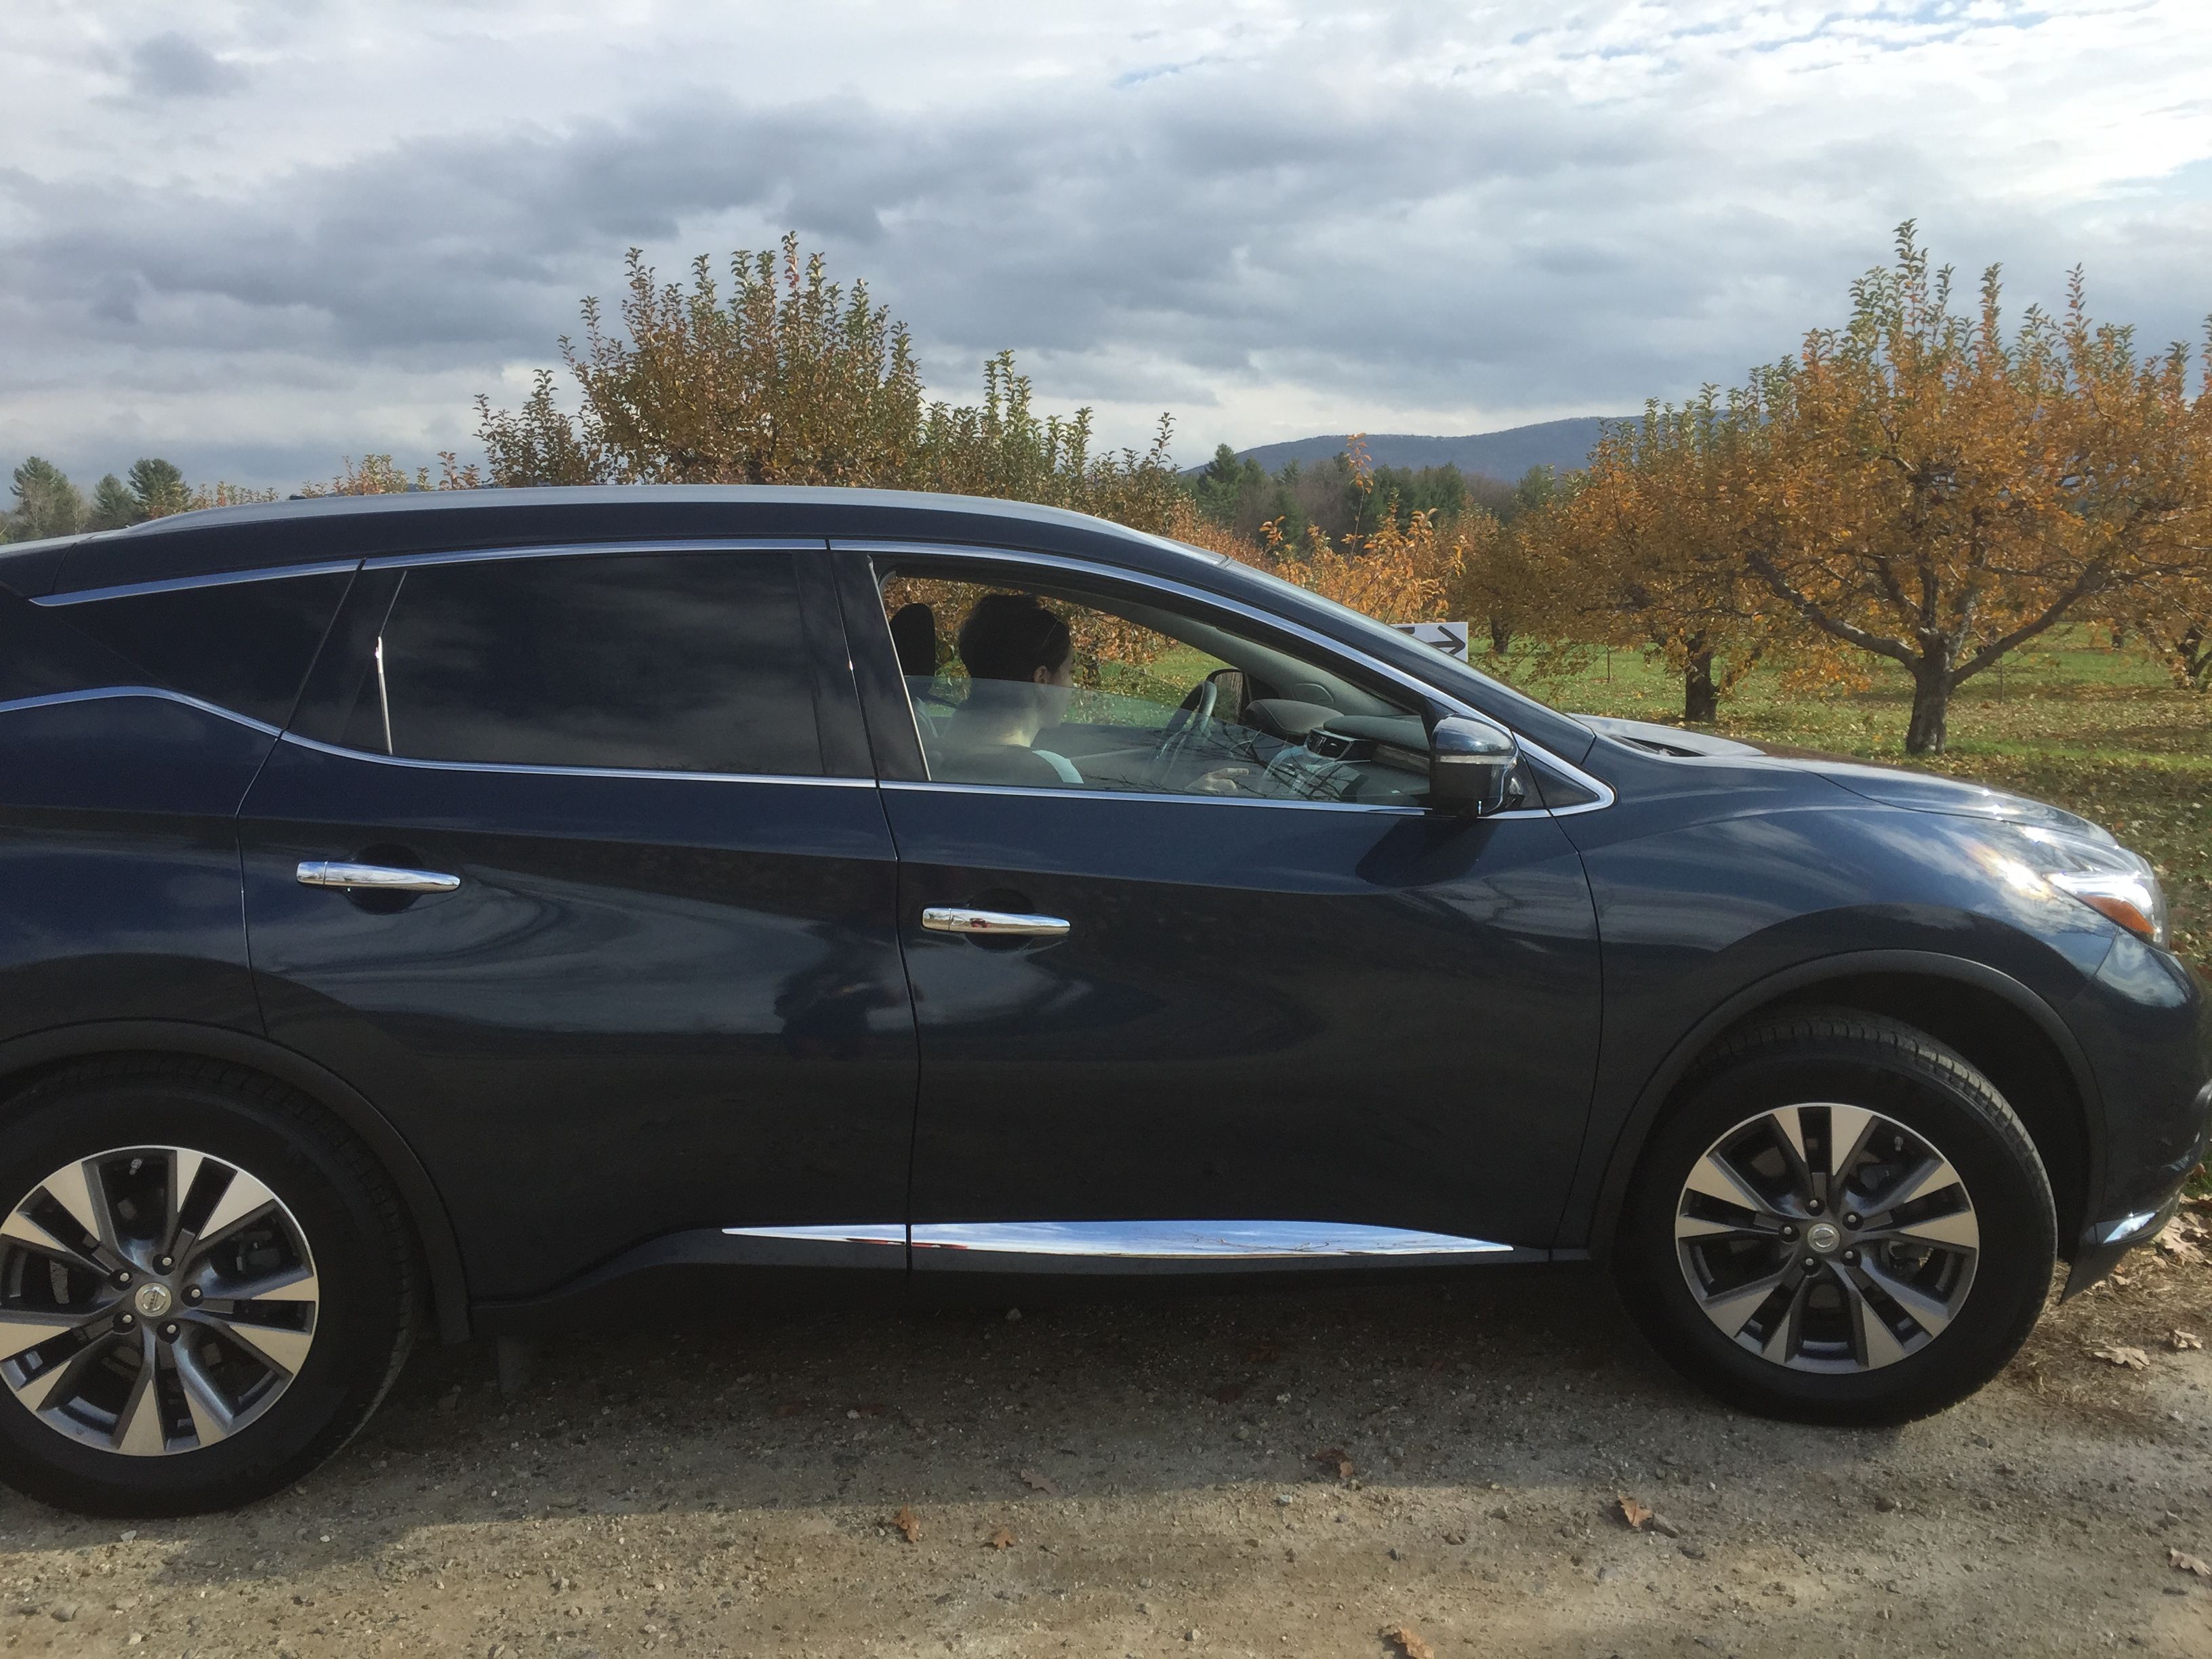 A Girls Guide To Cars | No Bickering: 2015 Nissan Murano As Marriage Saver? - Fall